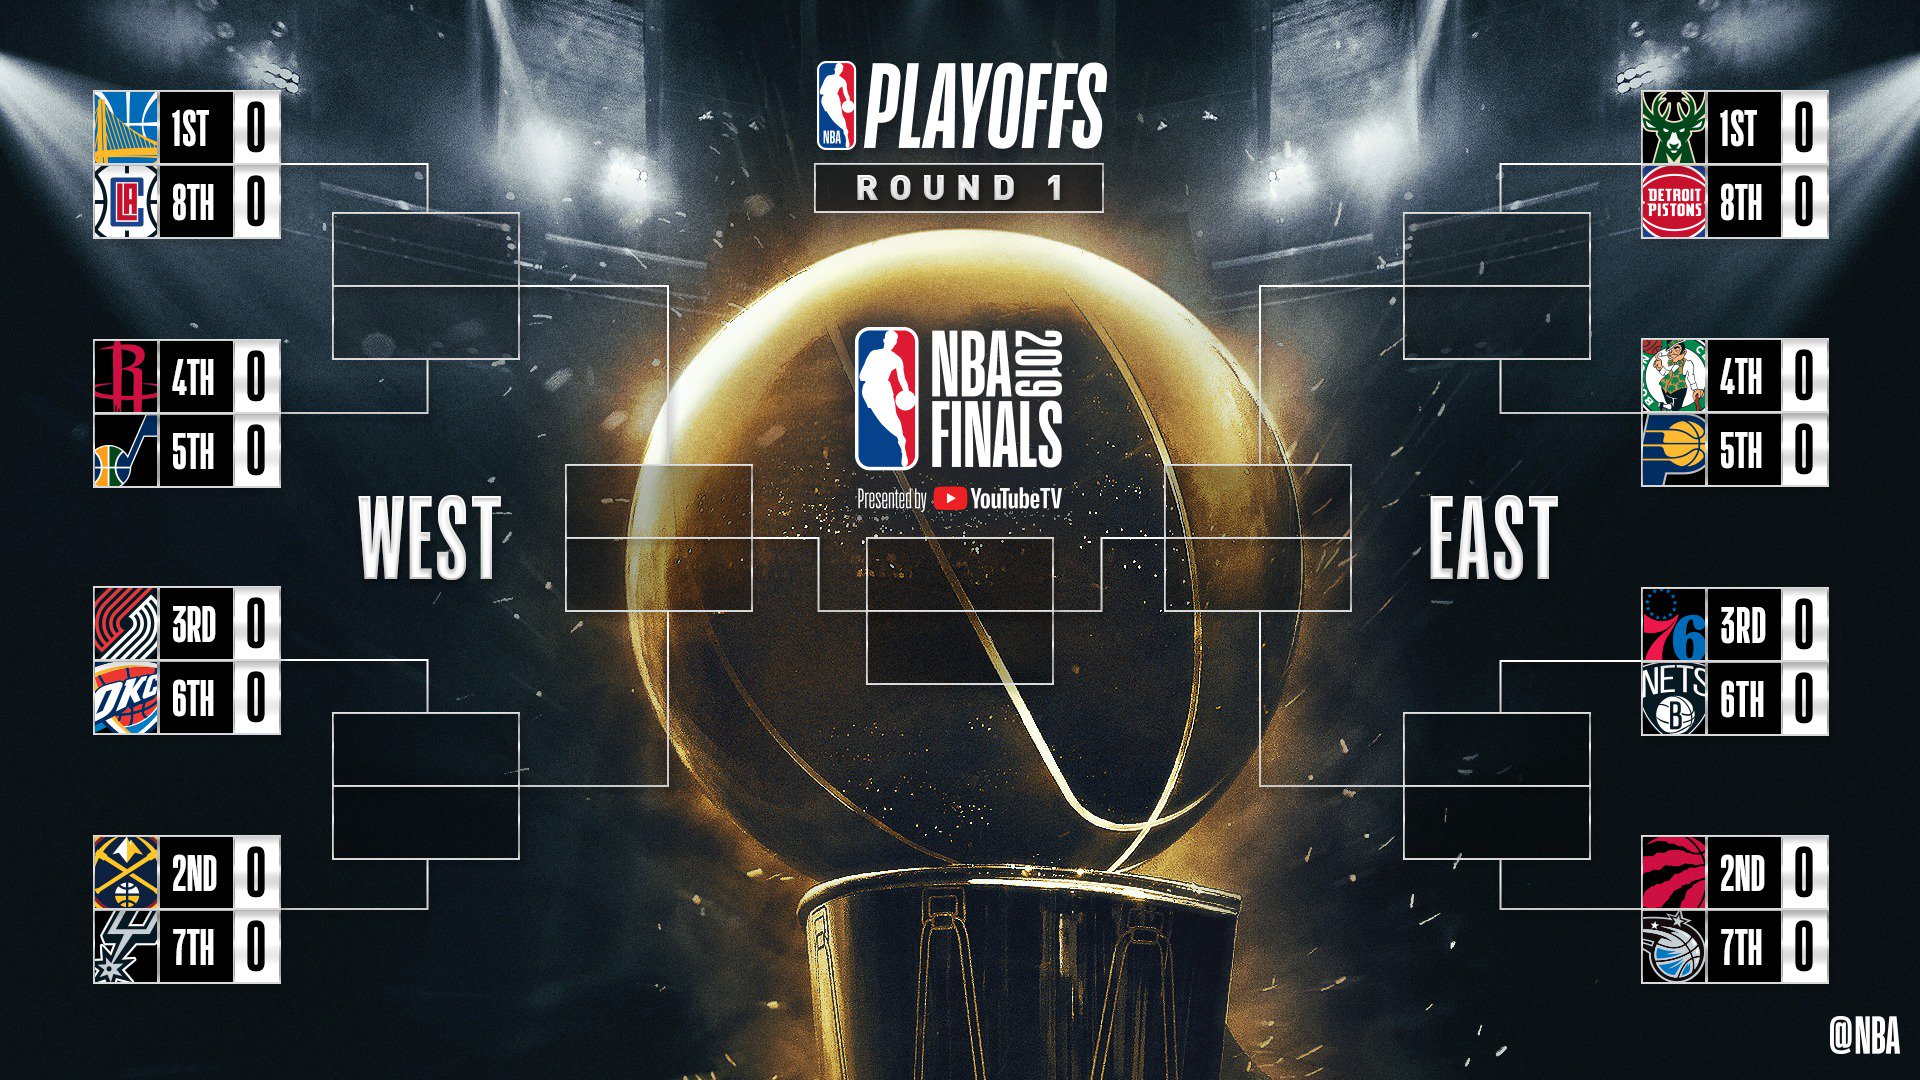 Nba The 19 Nbaplayoffs Are Set Games Begin On Saturday April 13th